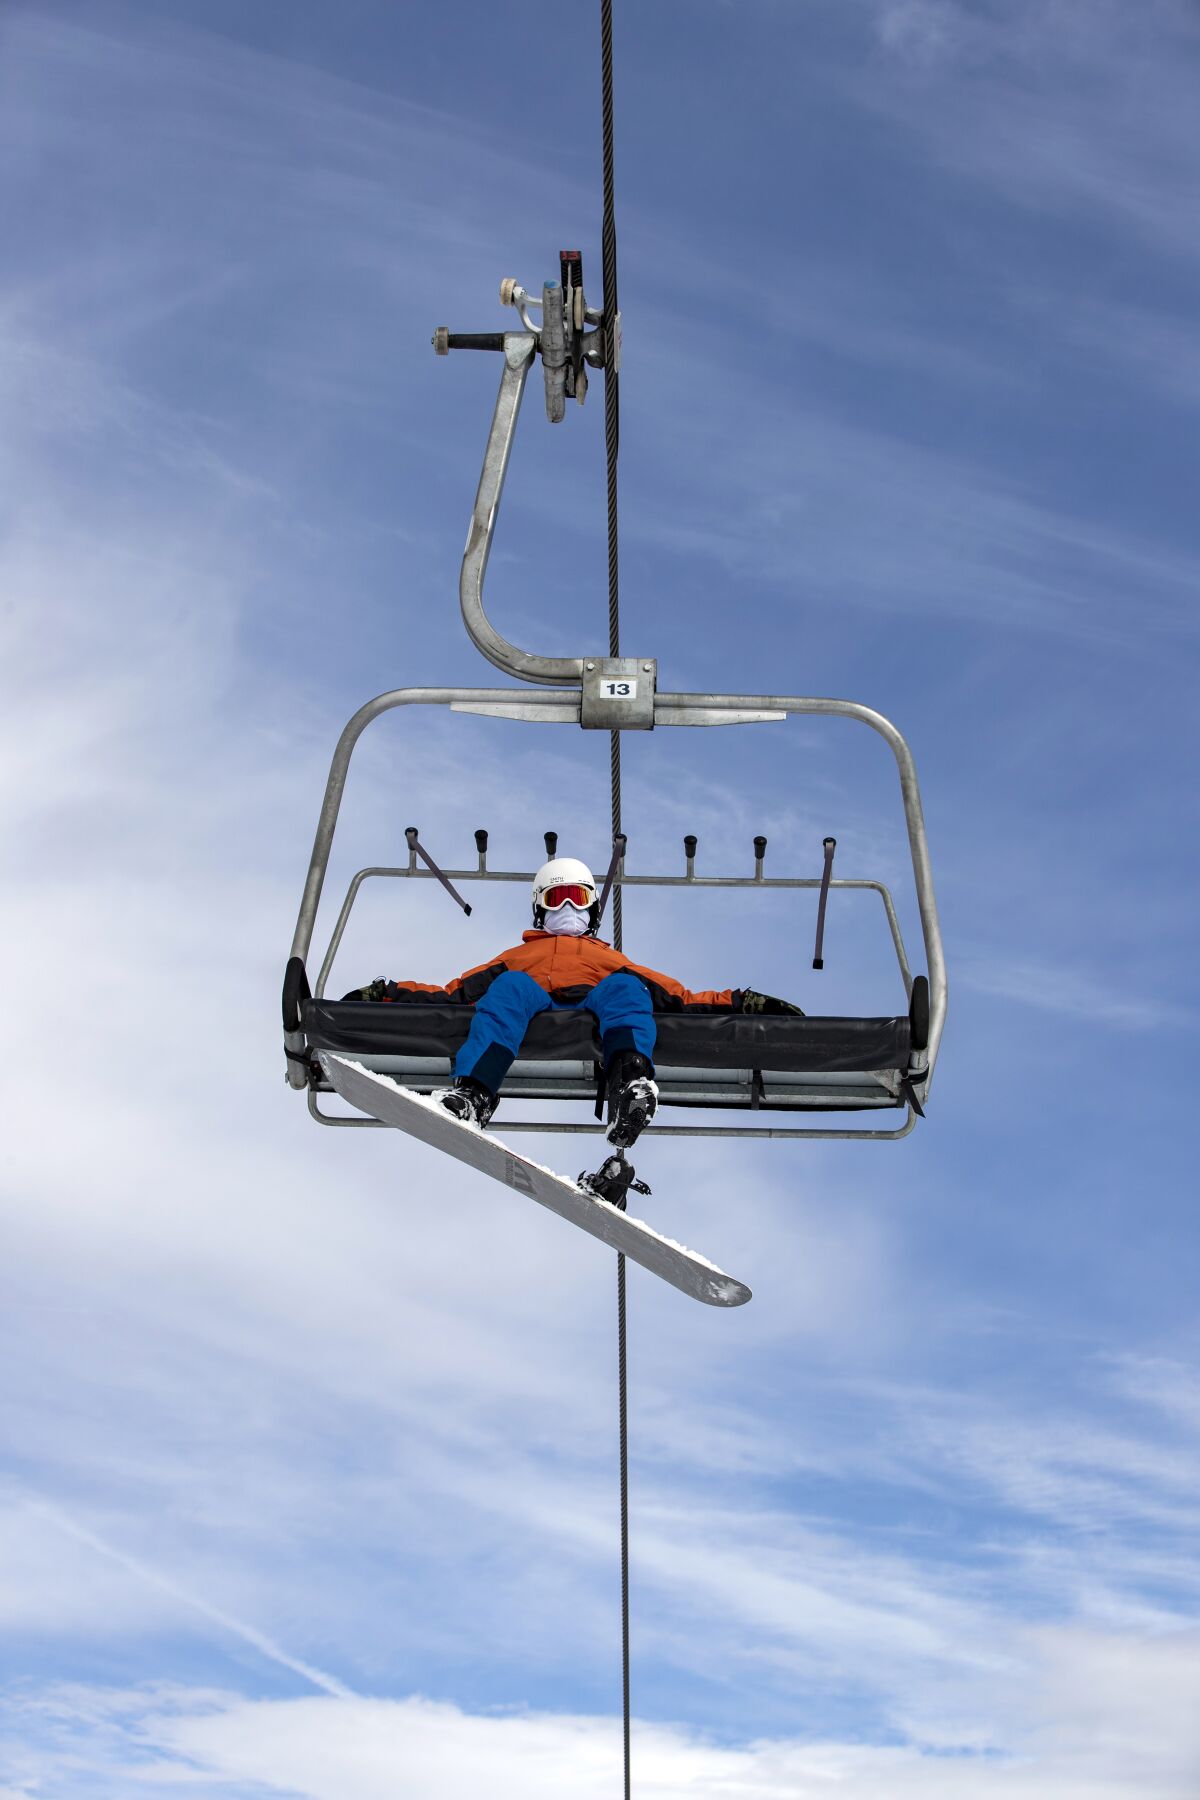 A solo snowboarder, seen from below, rides a chair lift wearing a face covering, snowboard dangling from one foot.